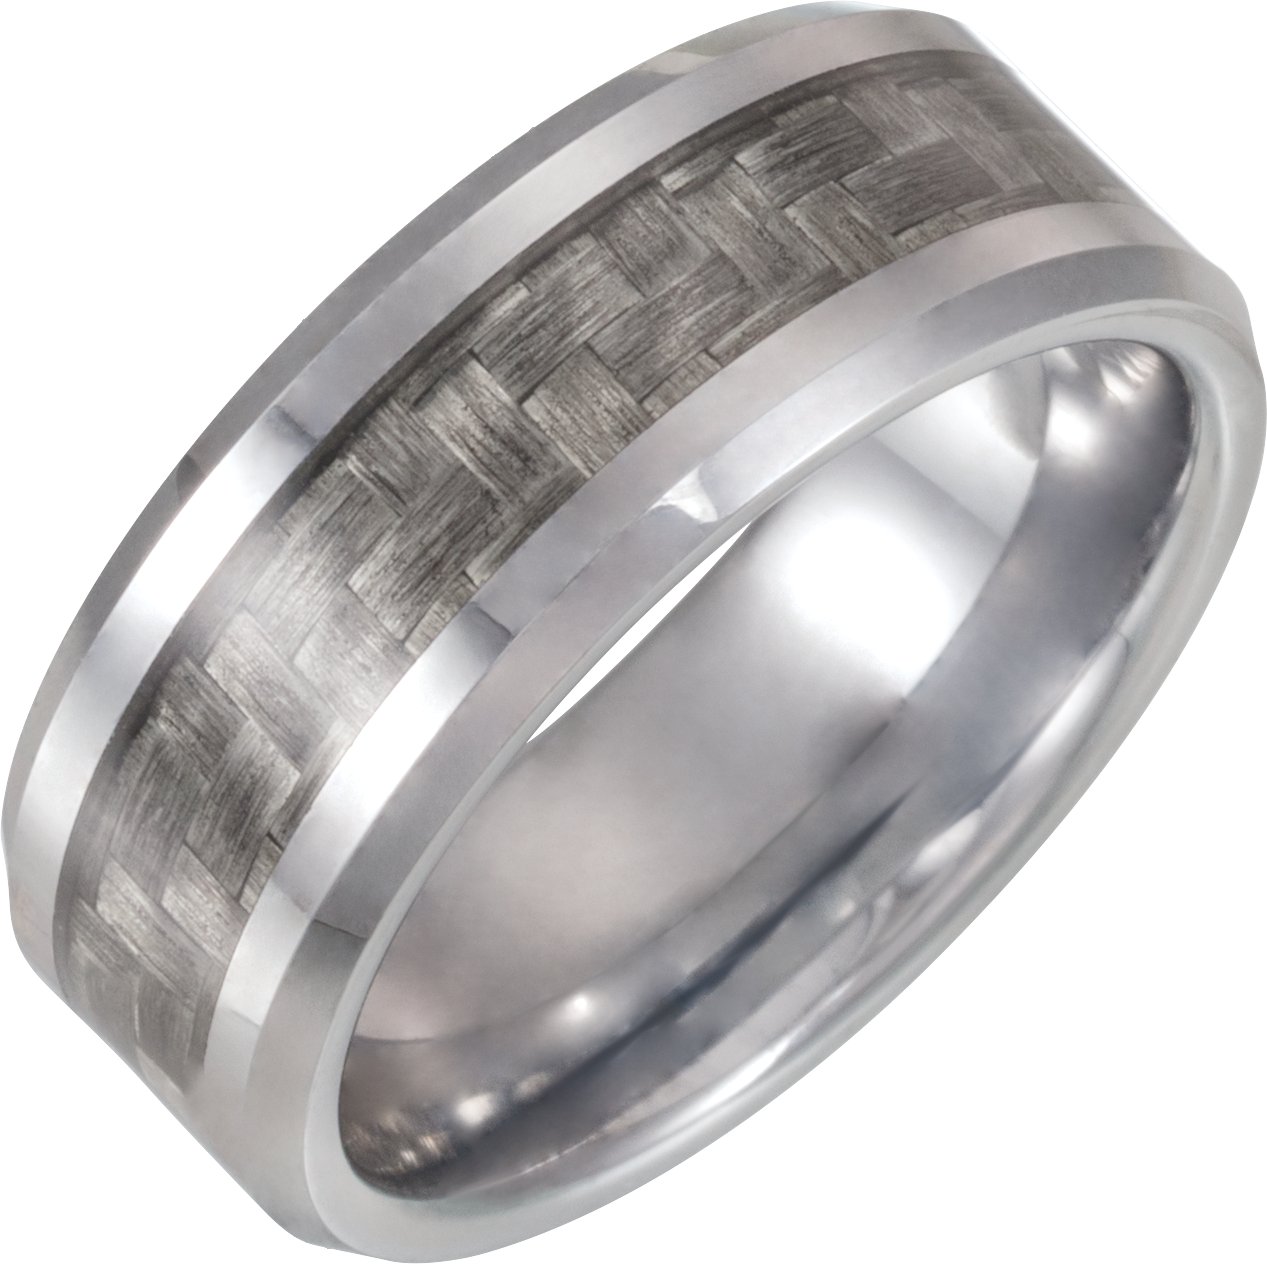 Tungsten 8 mm Band with Carbon Fiber Inlay Size 6.5